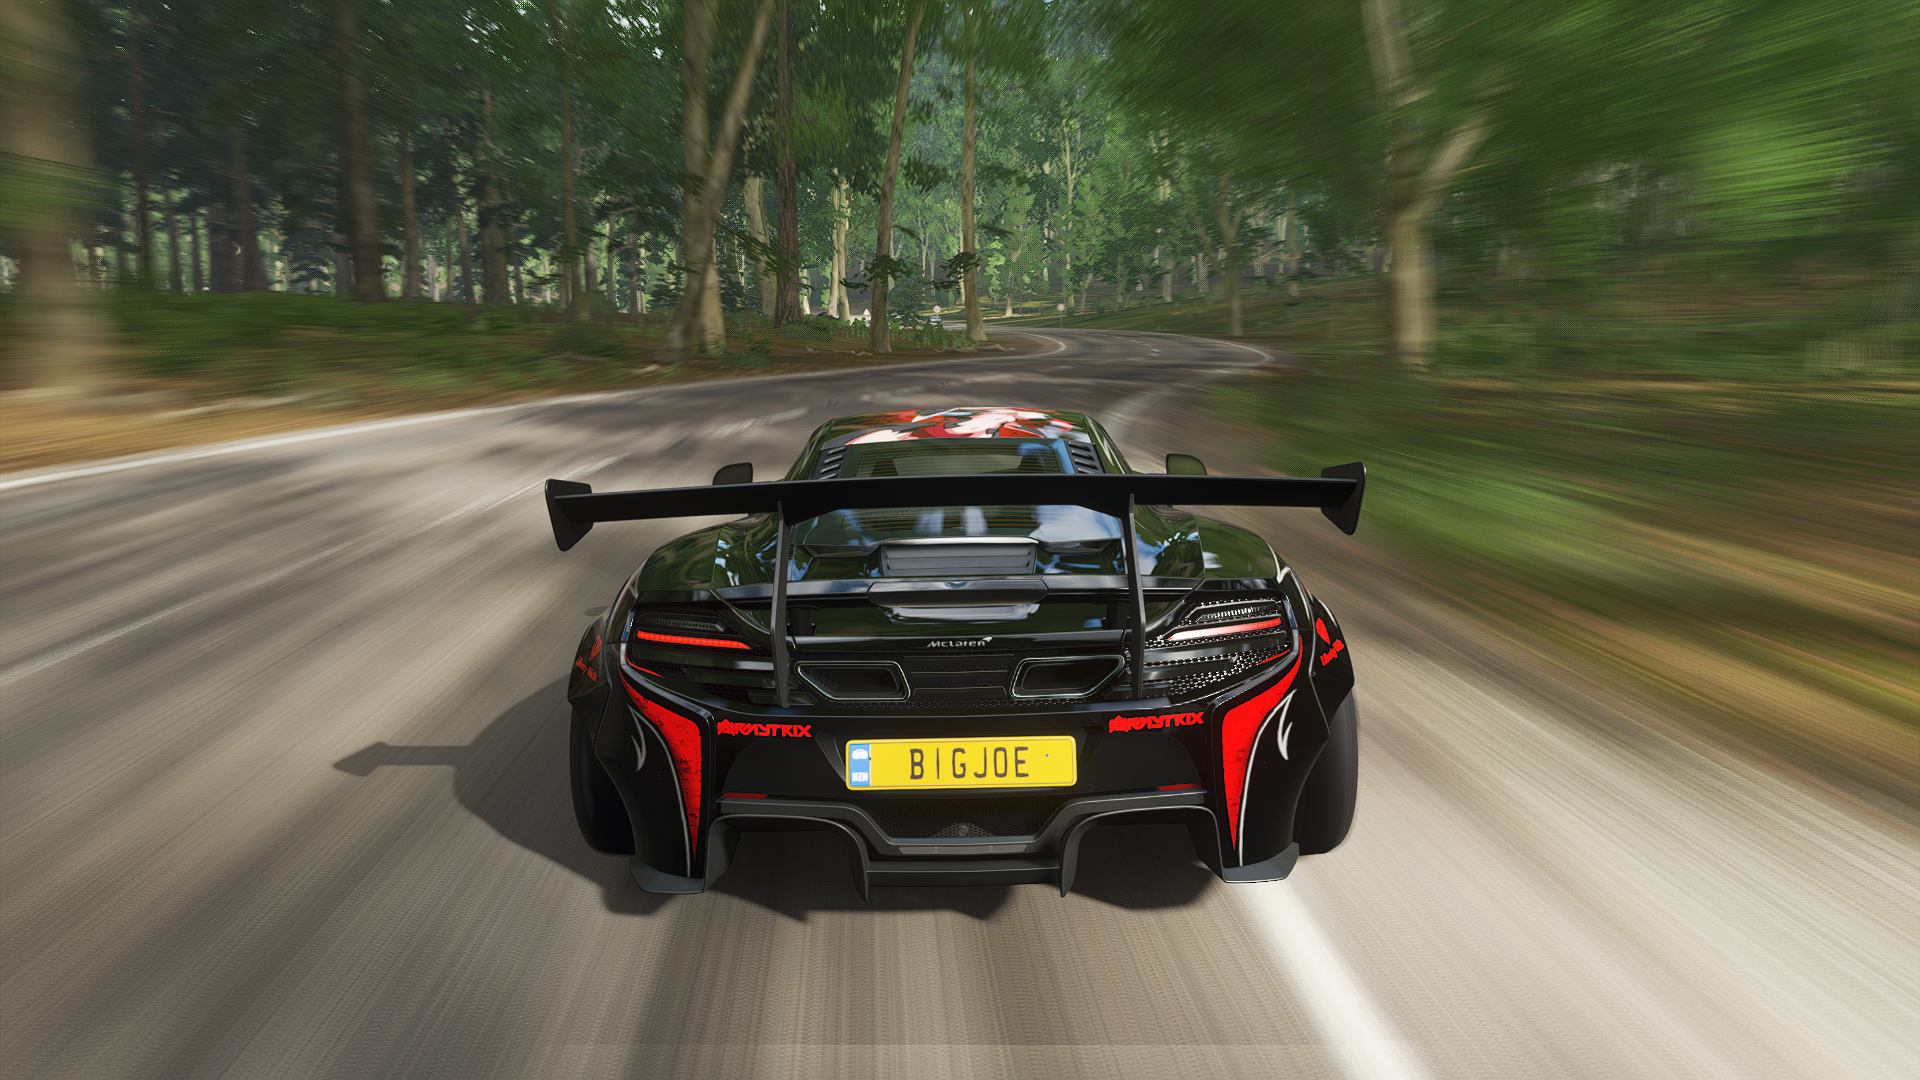 General 1920x1080 Forza Forza Horizon Forza Horizon 4 car racing rear view licence plates road blurred blurry background trees race cars video games